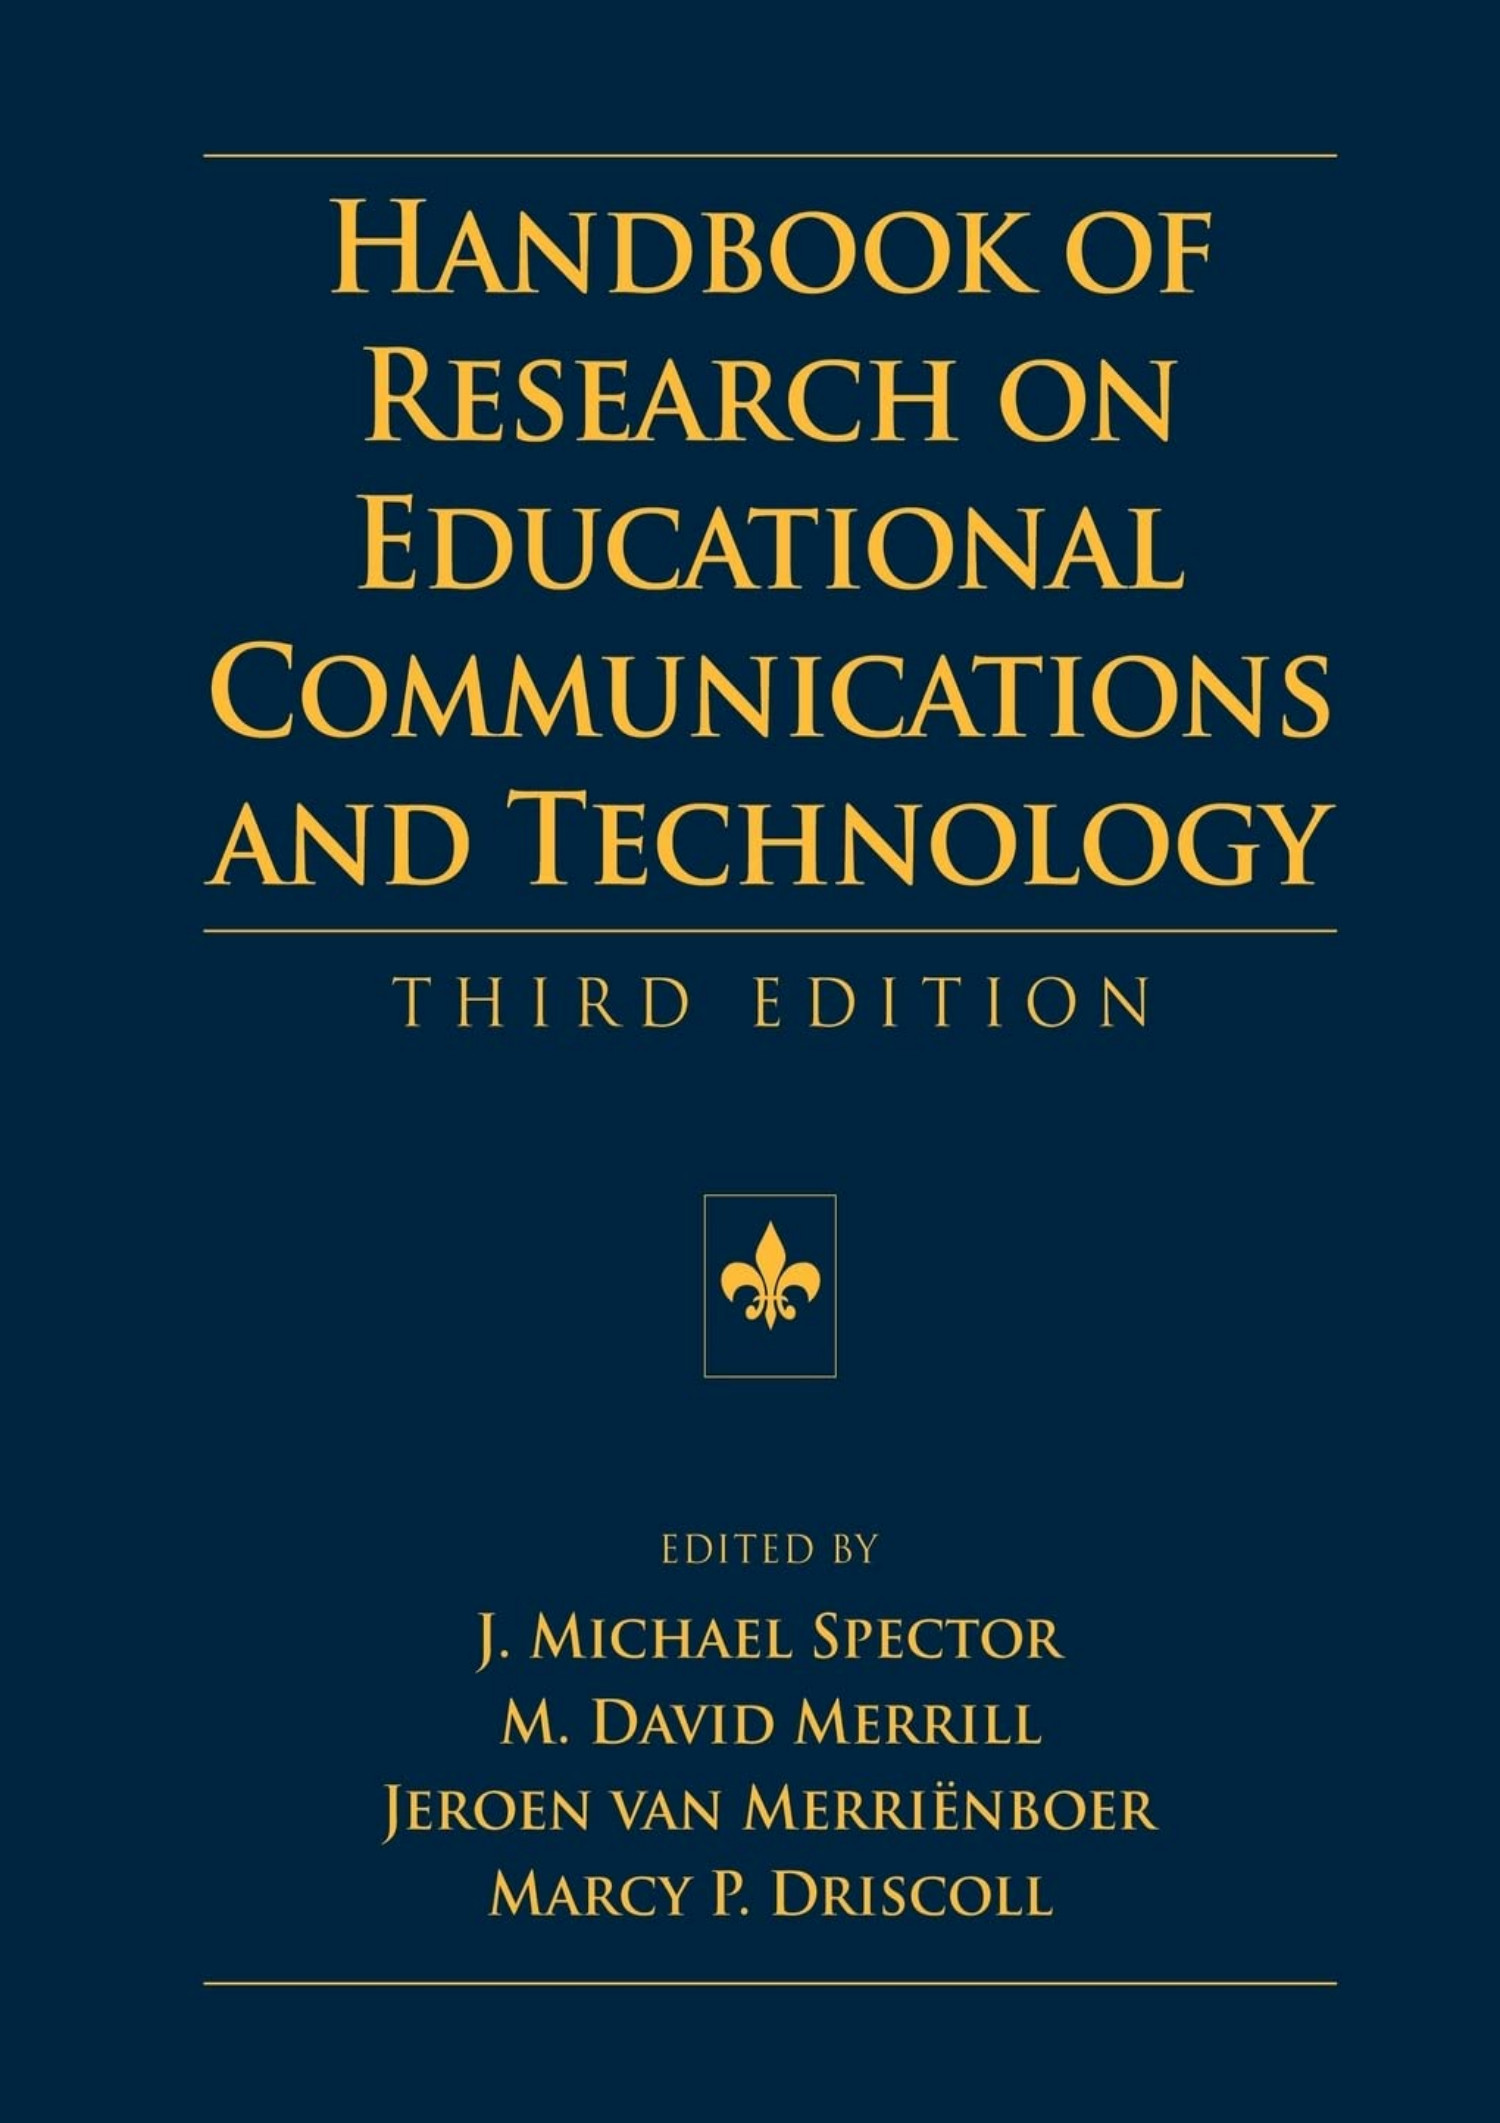 handbook of research on educational communications and technology pdf